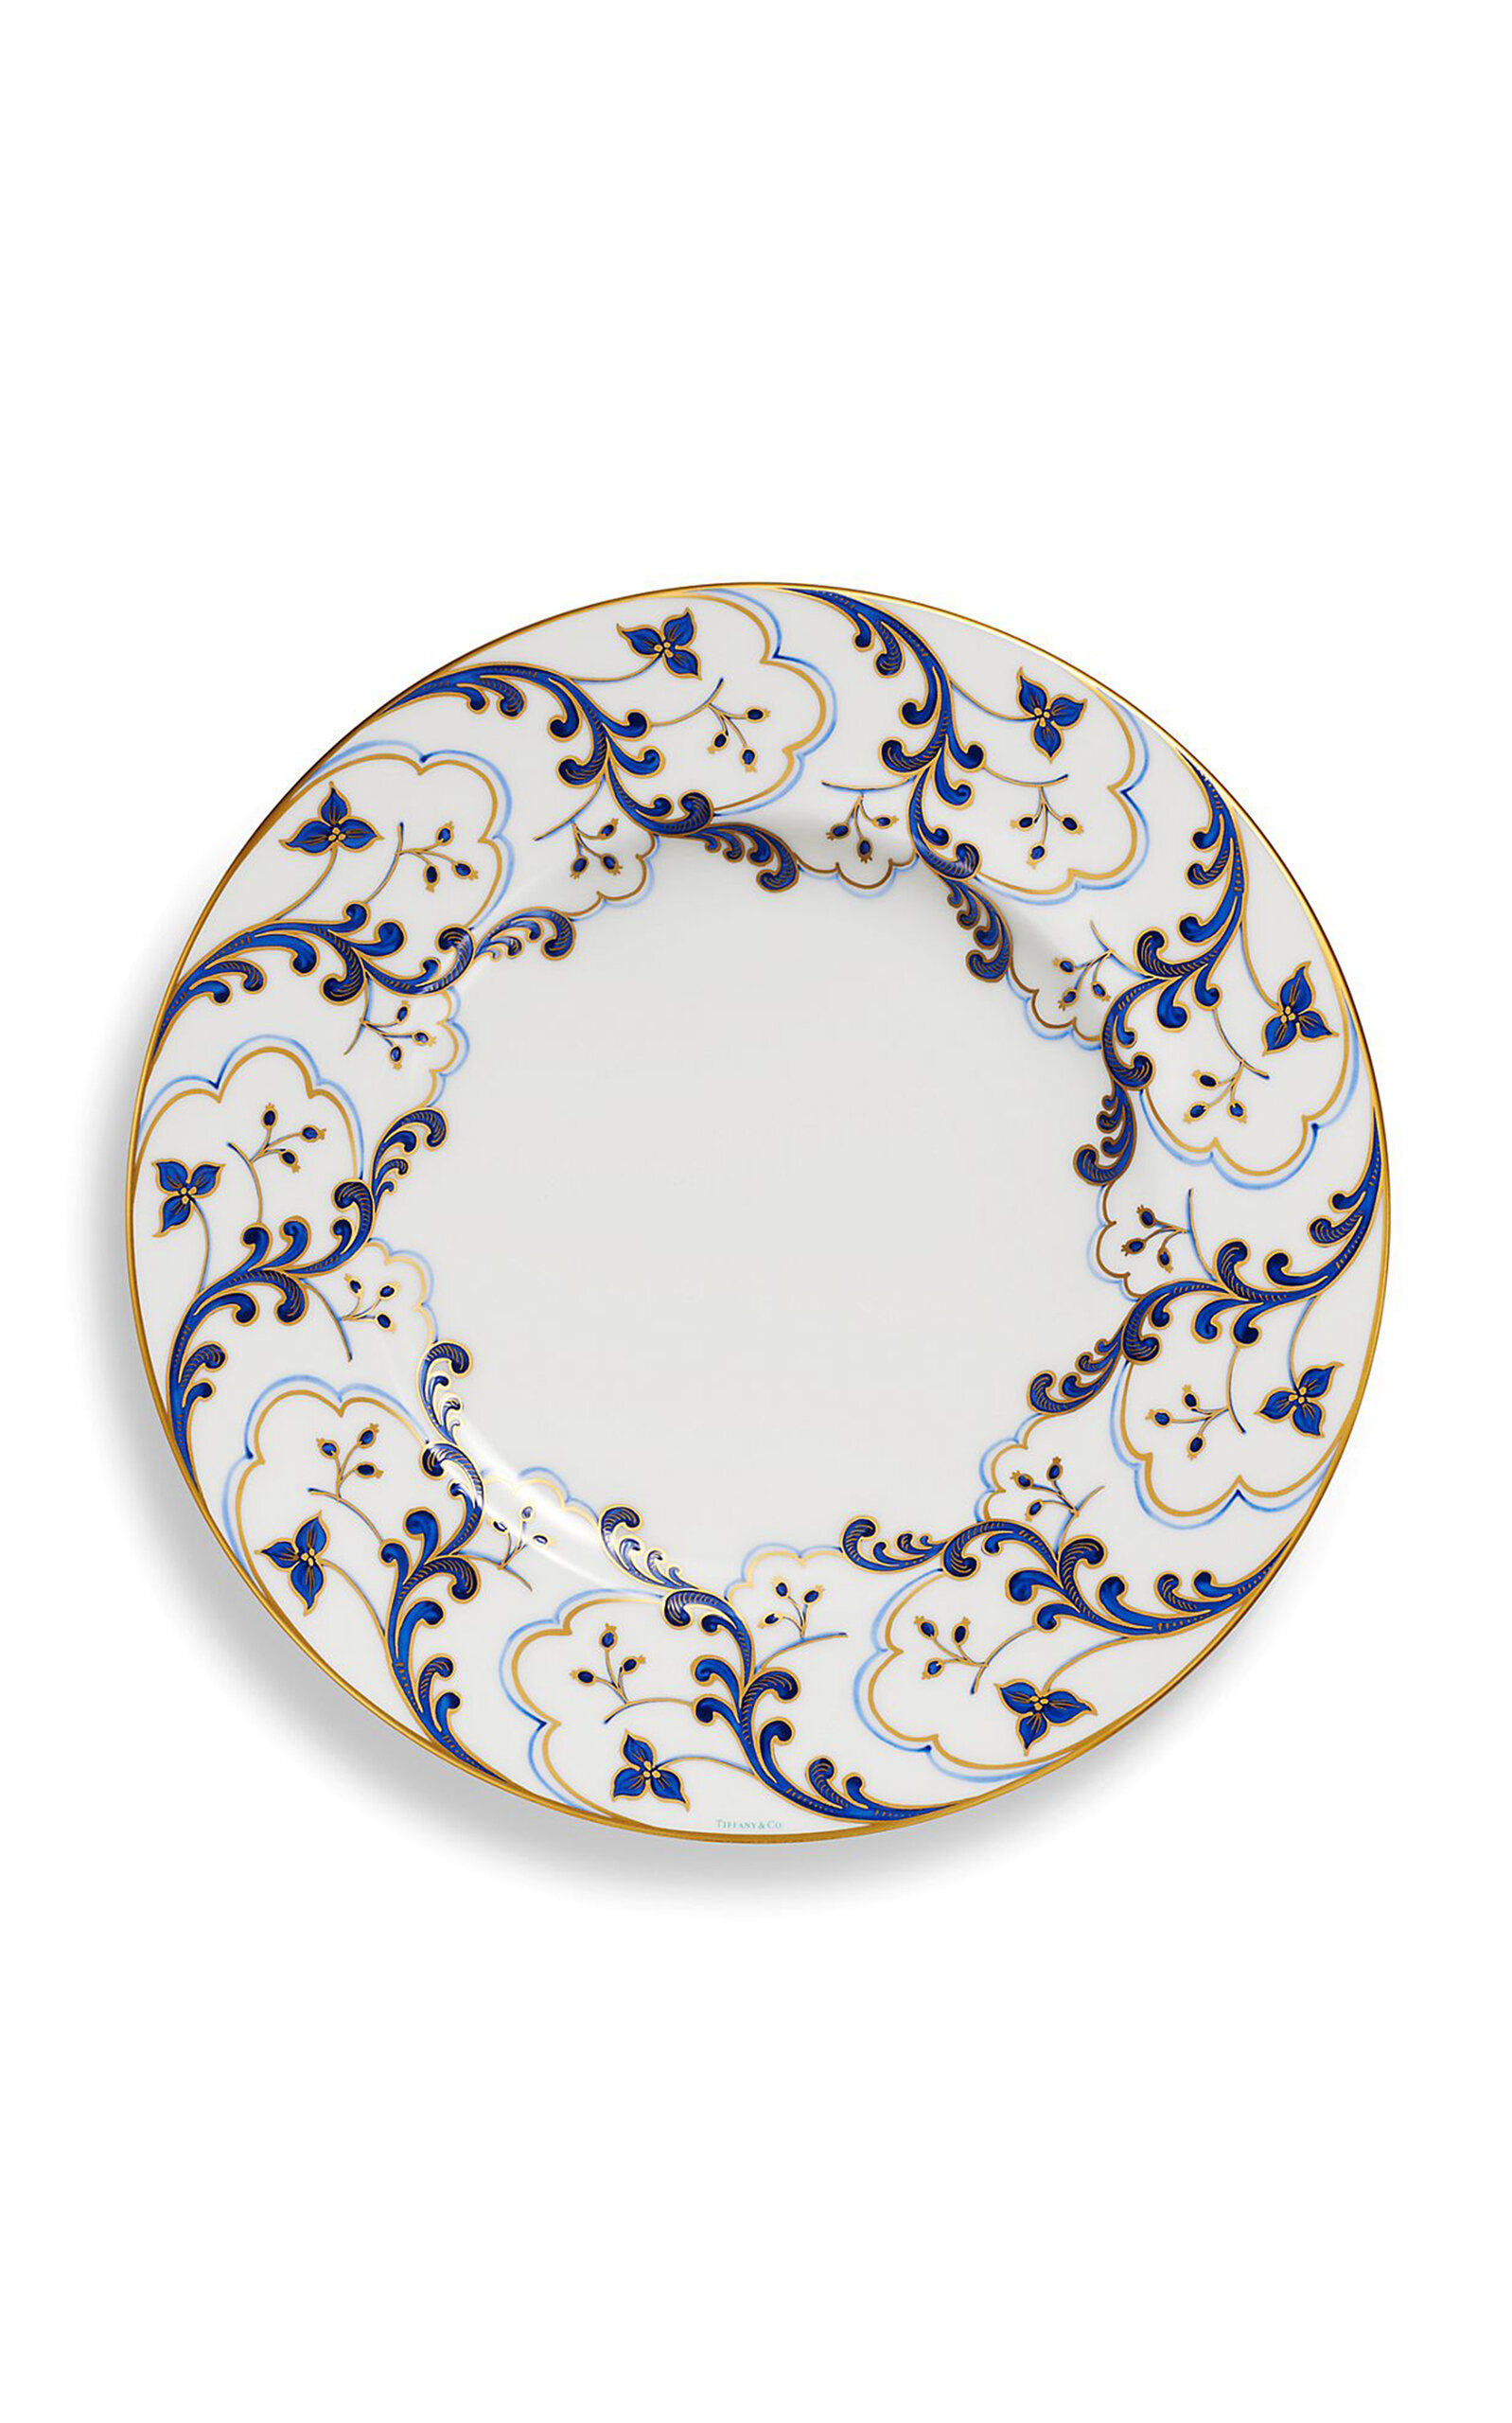 Tiffany & Co Valse Bleue Bone China Charger Plate In Blue